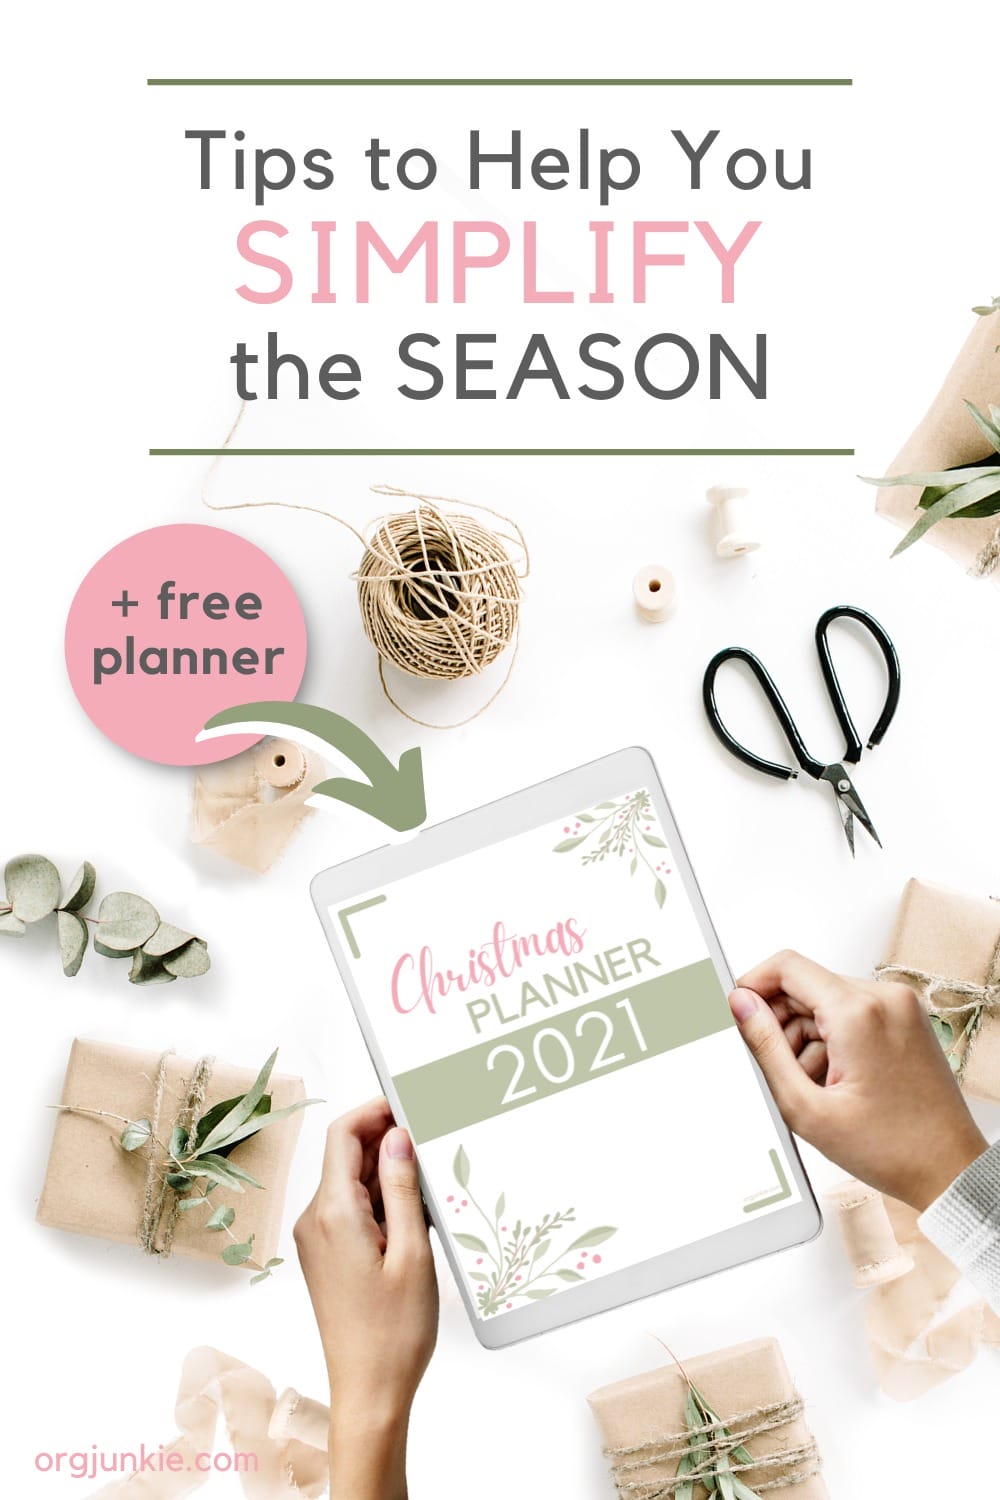 6 Tips for a Simplified Organized Christmas with Free Printable Christmas Planner!